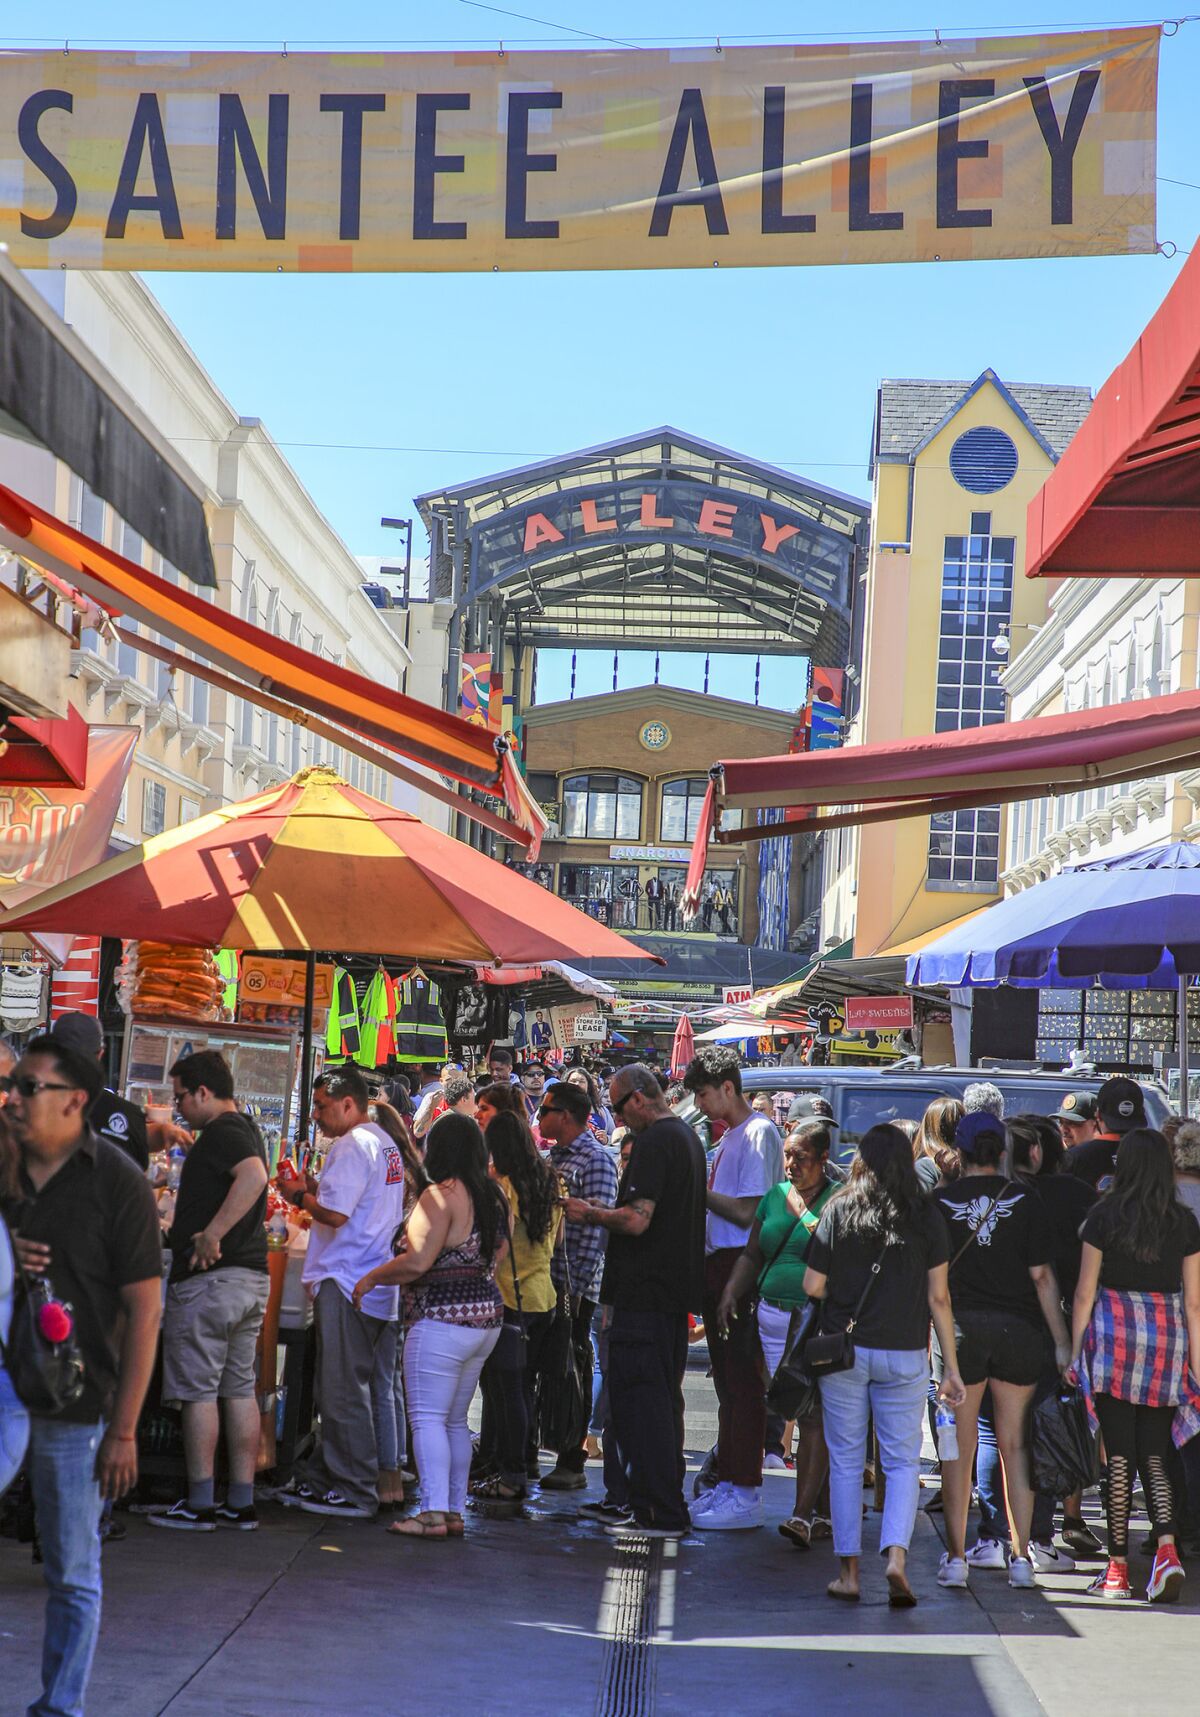 A stroll through the colorful and chaotic Santee Alley shopping district is a must. You'll find over 150 stores selling clothing, shoes, sunglasses, wigs, prom dresses and more.